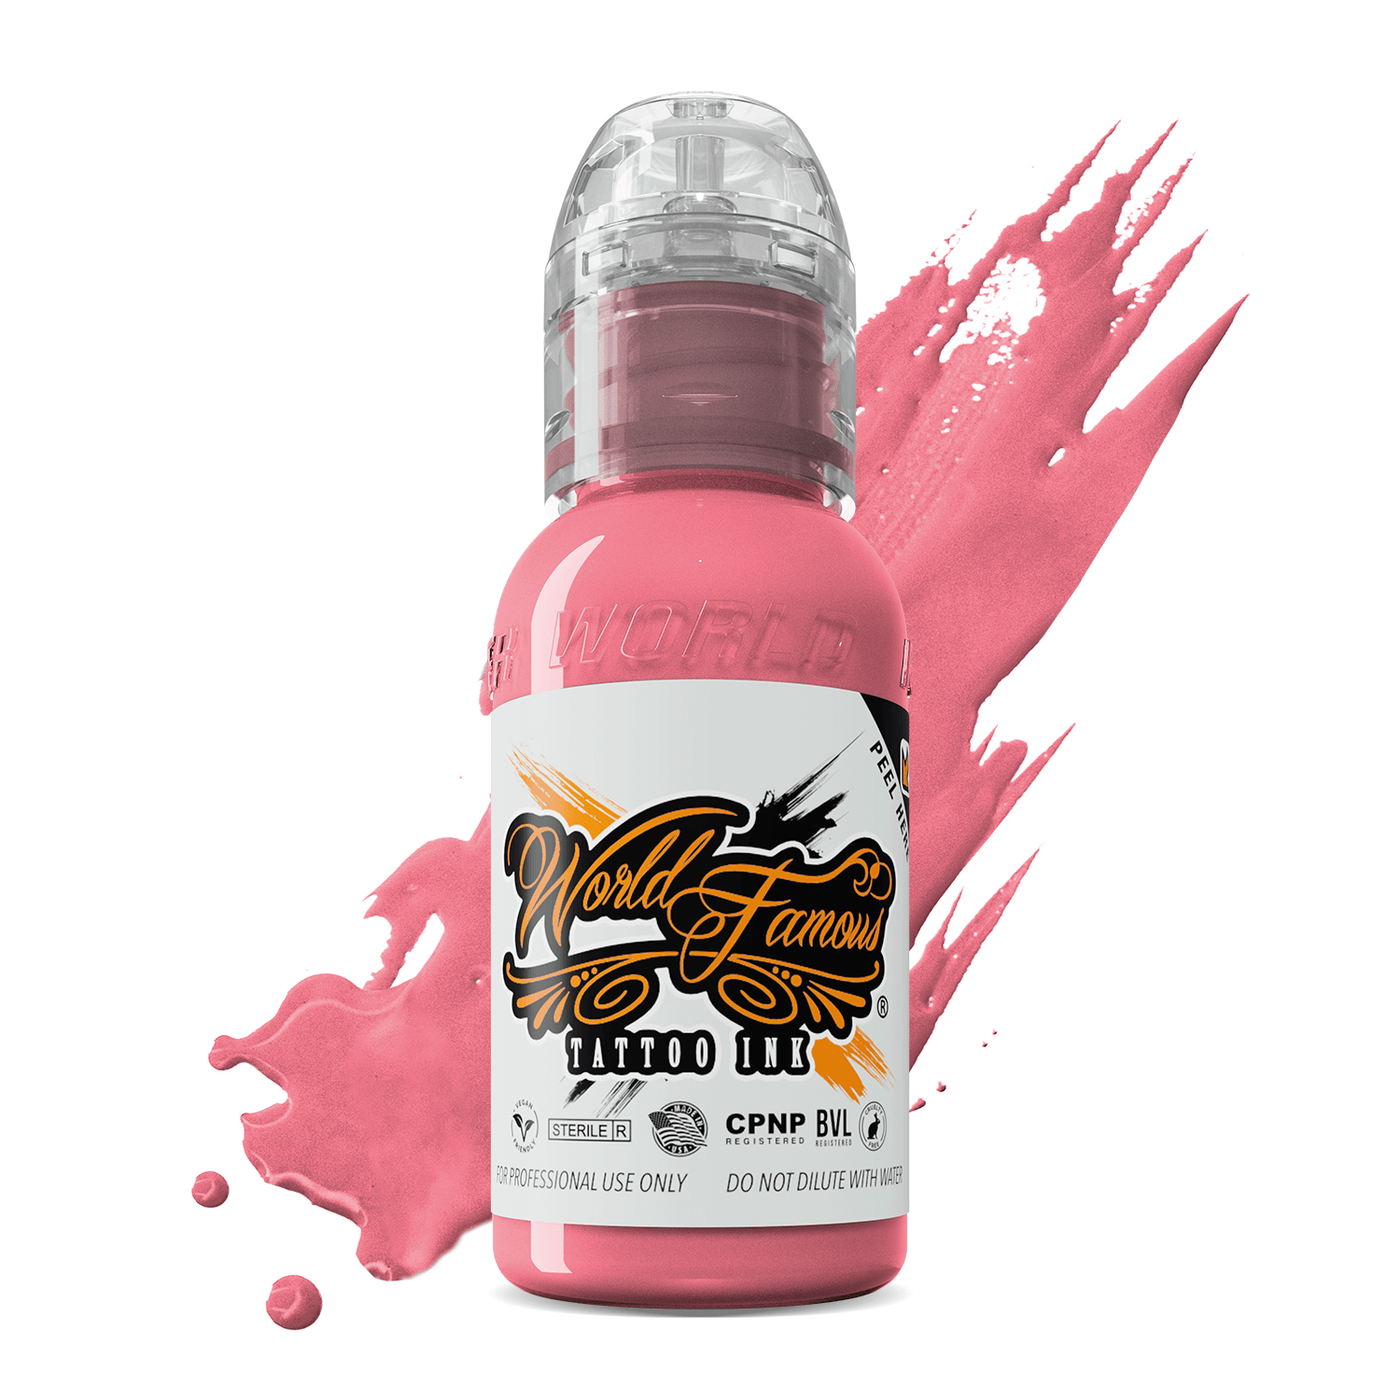 World Famous Flying Pig PInk - Tattoo Ink - Mithra Tattoo Supplies Canada